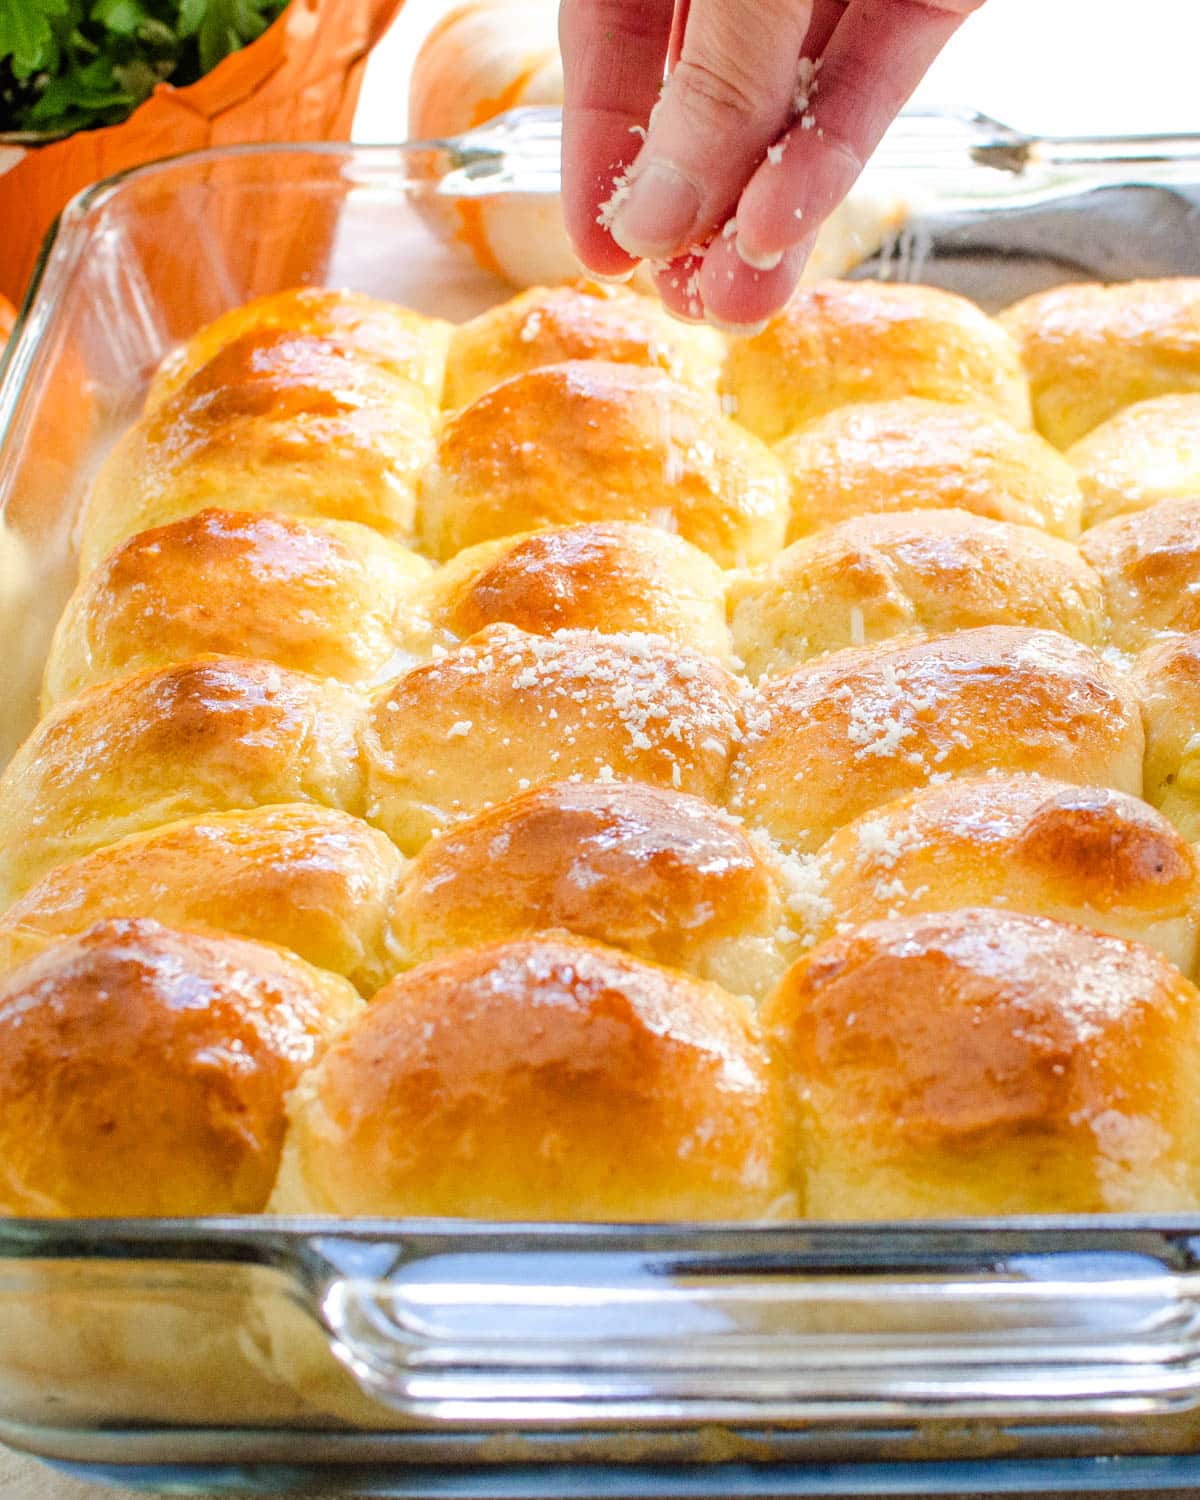 Sprinkling freshly grated parmesan cheese over the yeast rolls.